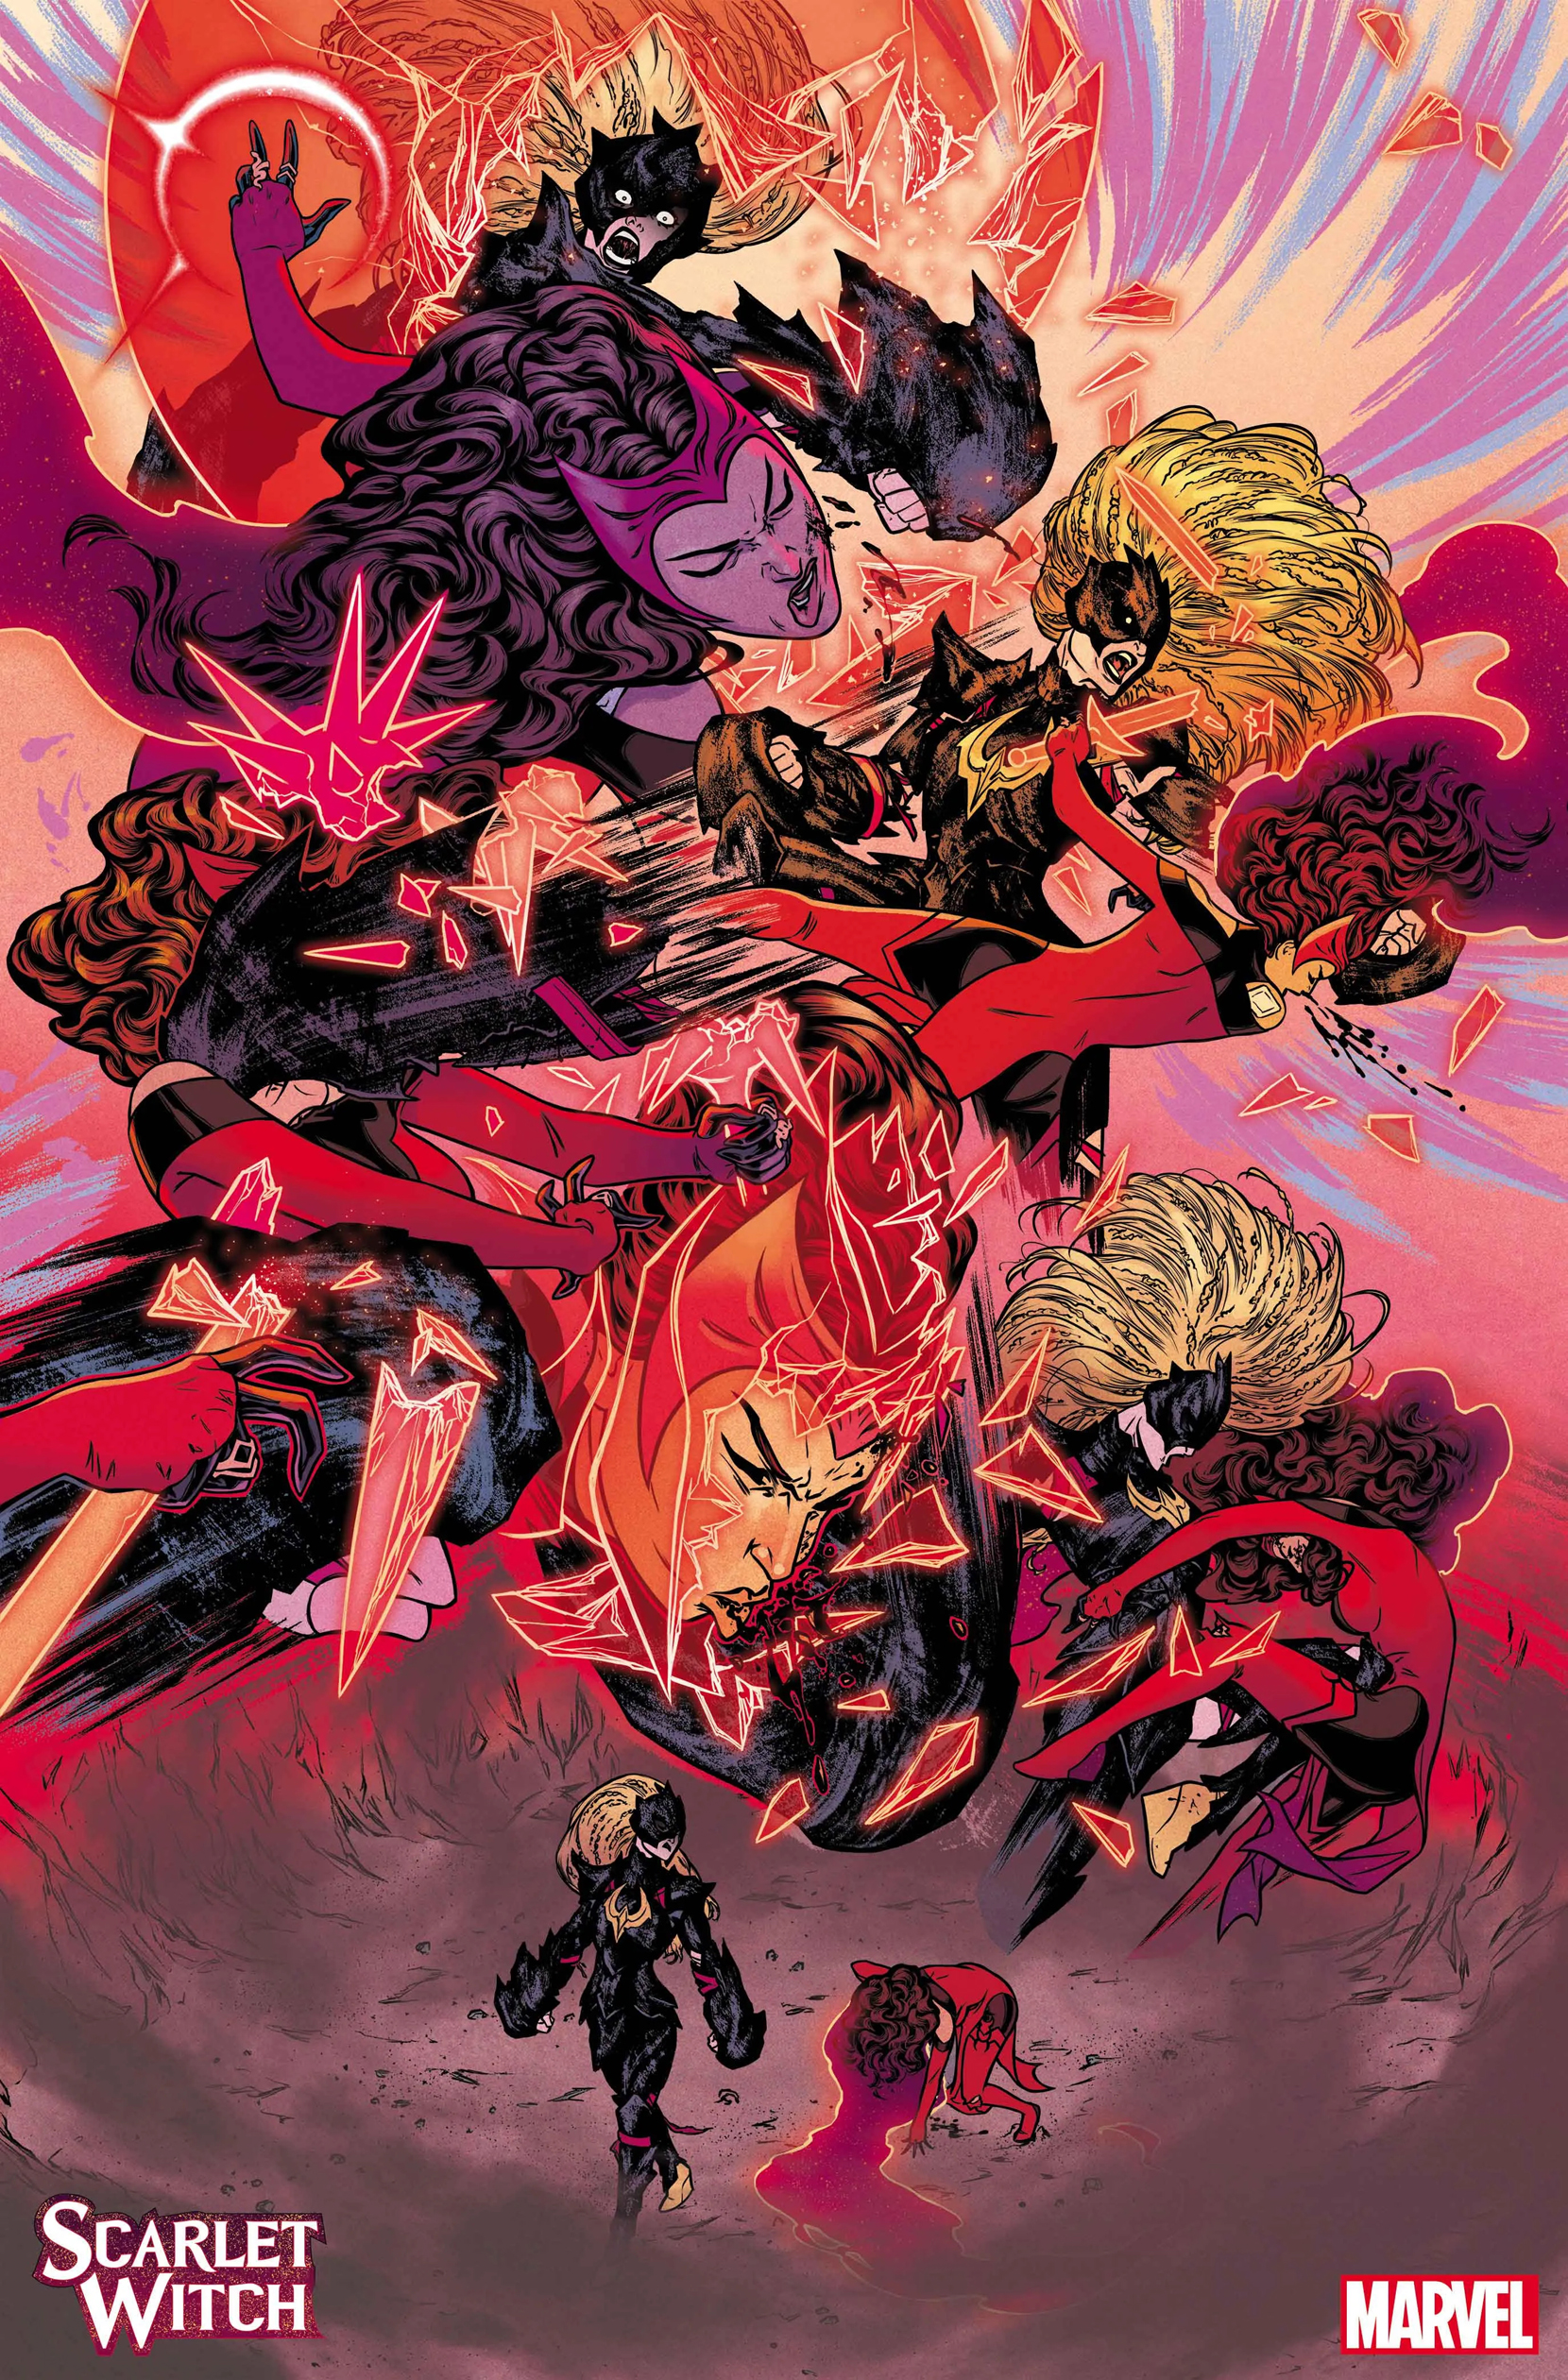 REVIEW: Scarlet Witch #5 – MabsArts